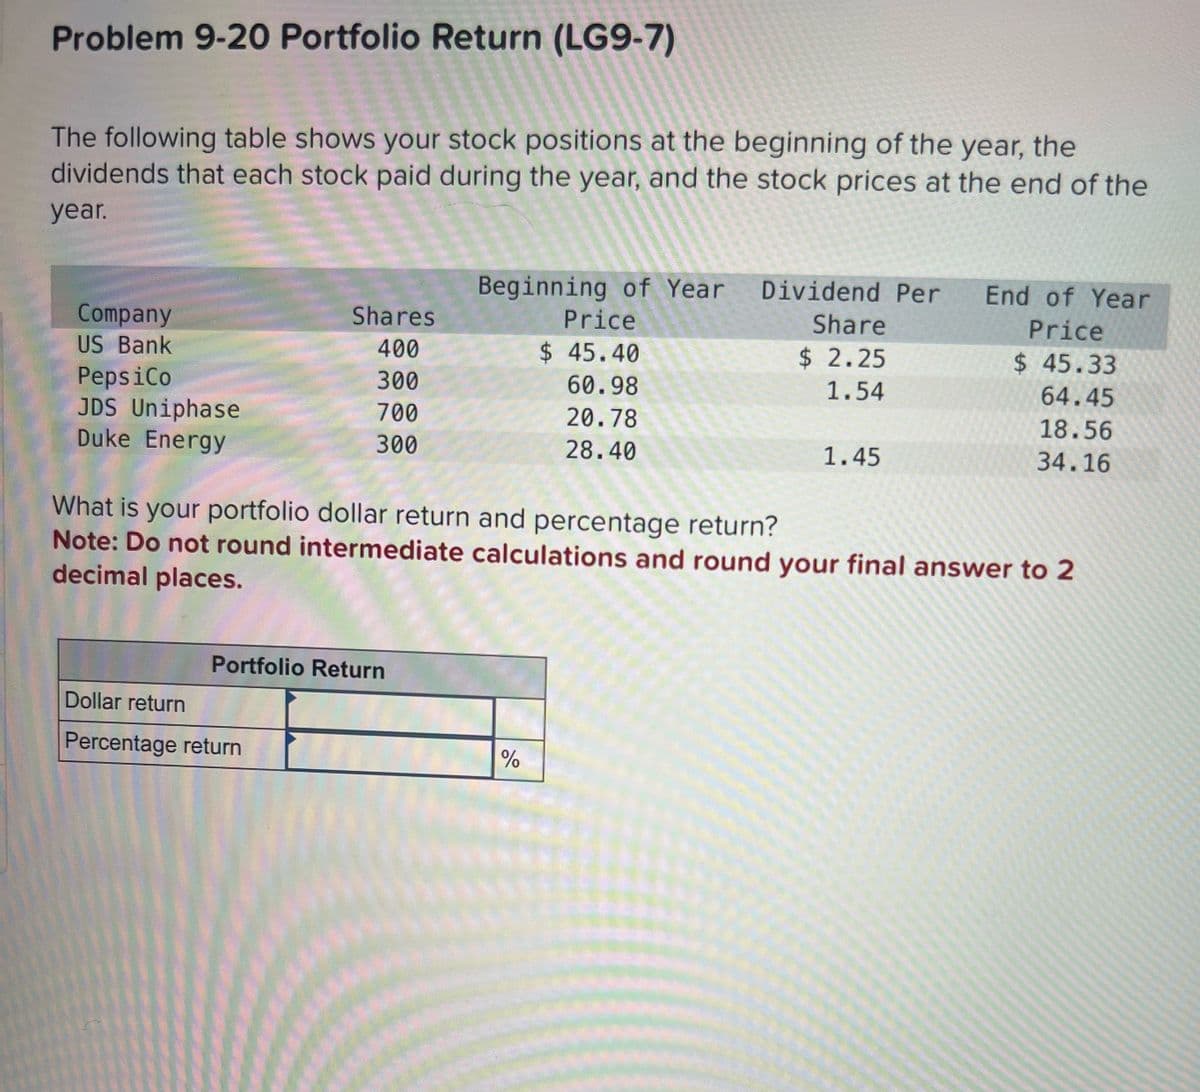 Problem 9-20 Portfolio Return (LG9-7)
The following table shows your stock positions at the beginning of the year, the
dividends that each stock paid during the year, and the stock prices at the end of the
year.
Company
US Bank
PepsiCo
JDS Uniphase
Duke Energy
Shares
400
300
700
300
Portfolio Return
Dollar return
Percentage return
Beginning of Year
Price
$ 45.40
60.98
20.78
28.40
Dividend Per
Share
$ 2.25
1.54
%
1.45
What is your portfolio dollar return and percentage return?
Note: Do not round intermediate calculations and round your final answer to 2
decimal places.
End of Year
Price
$ 45.33
64.45
18.56
34.16